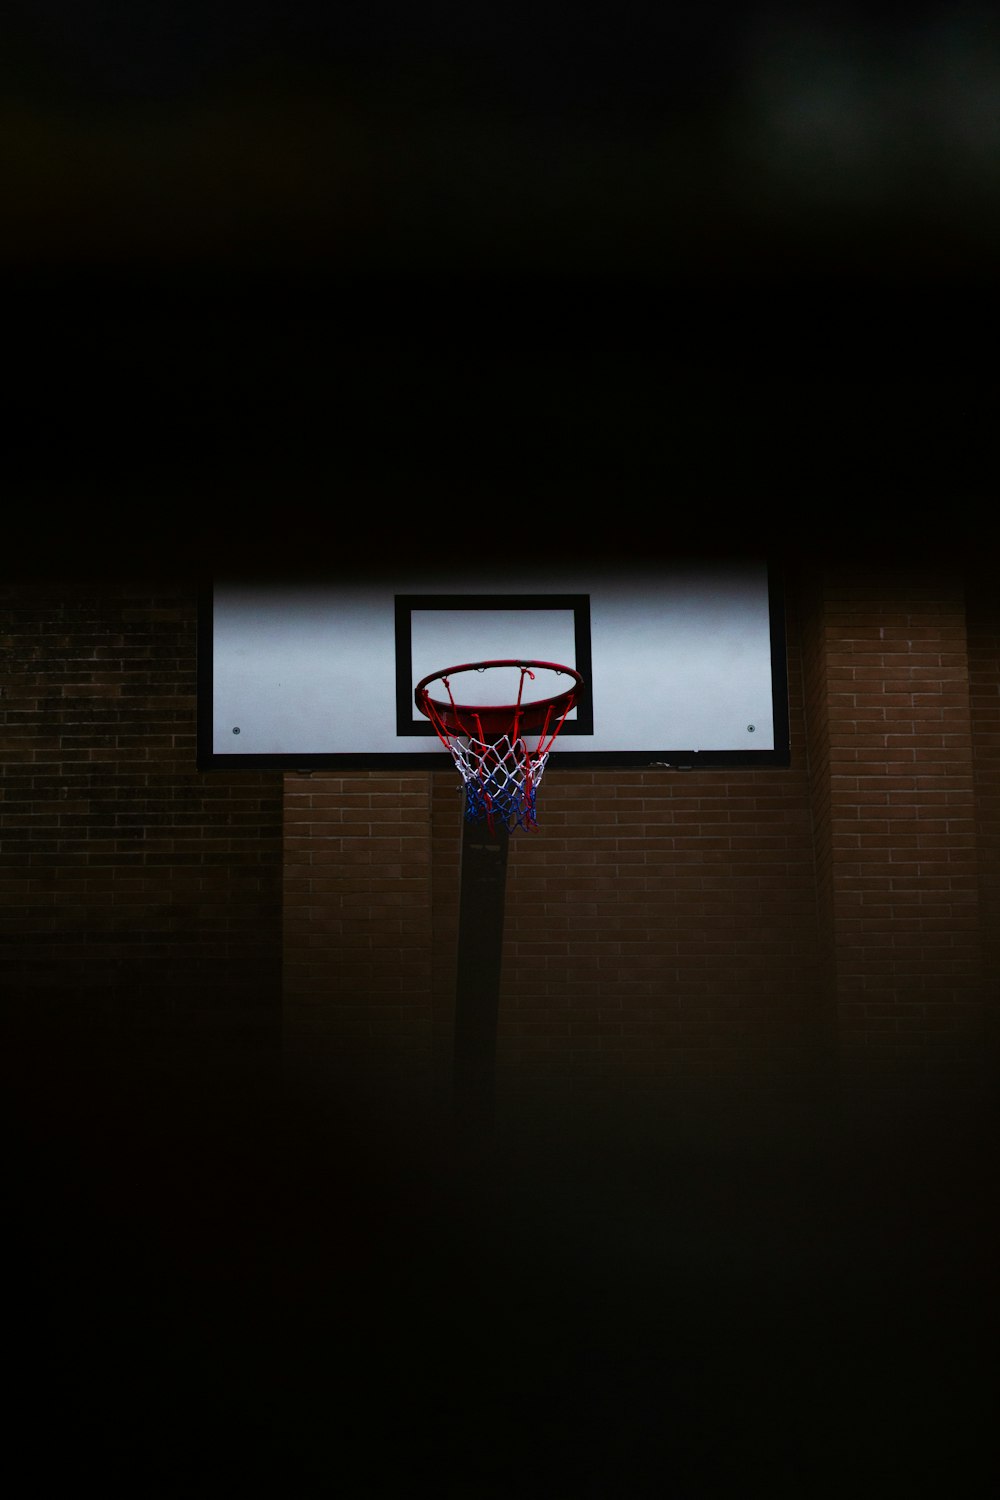 a basketball hoop in a dark room with a brick wall